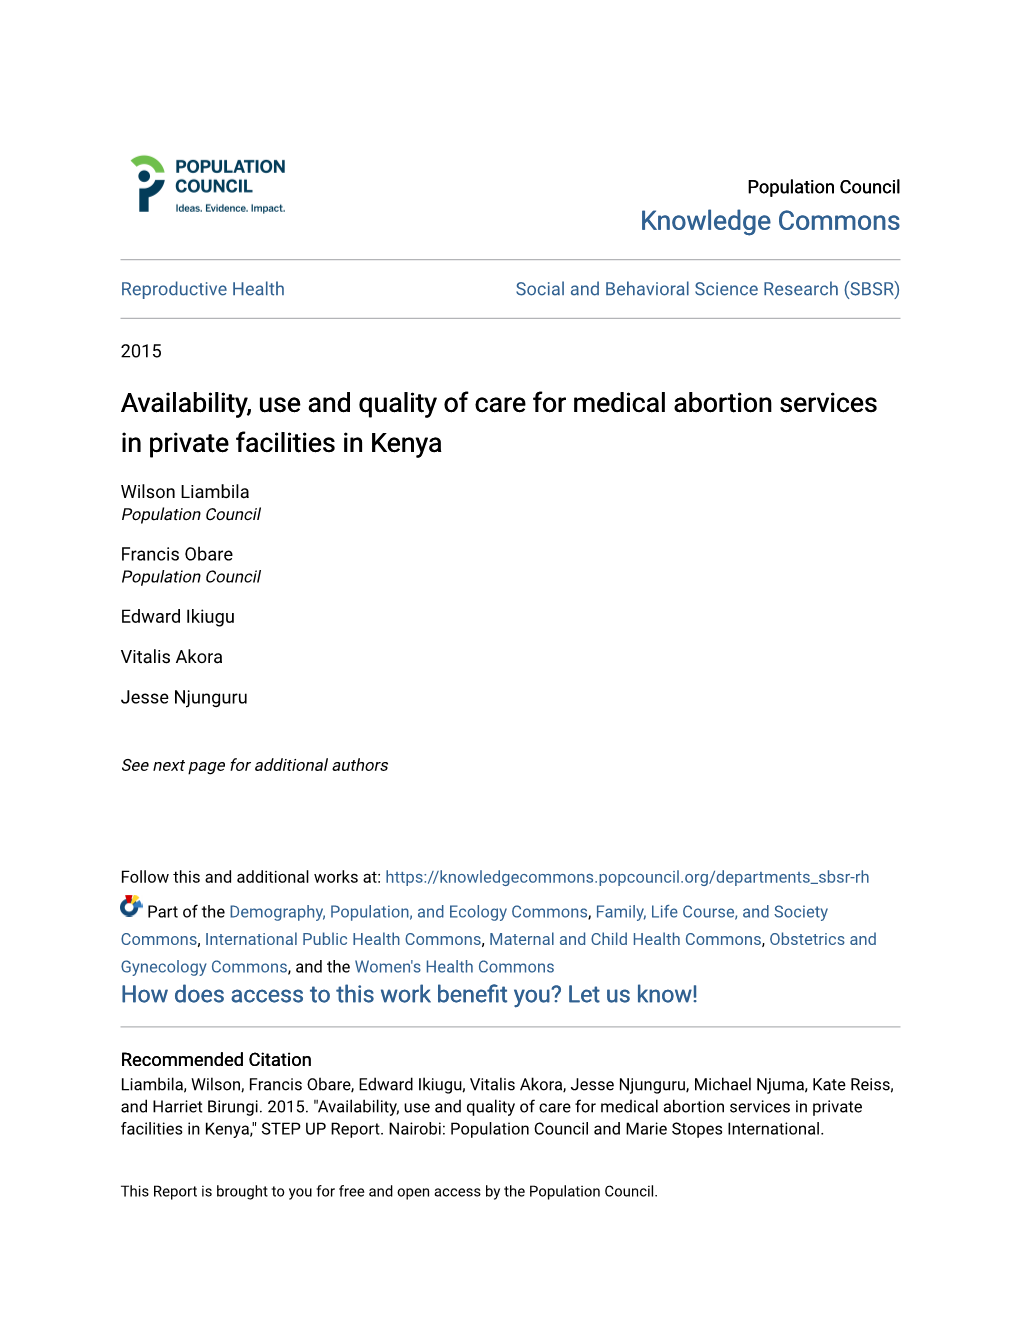 Availability, Use and Quality of Care for Medical Abortion Services in Private Facilities in Kenya